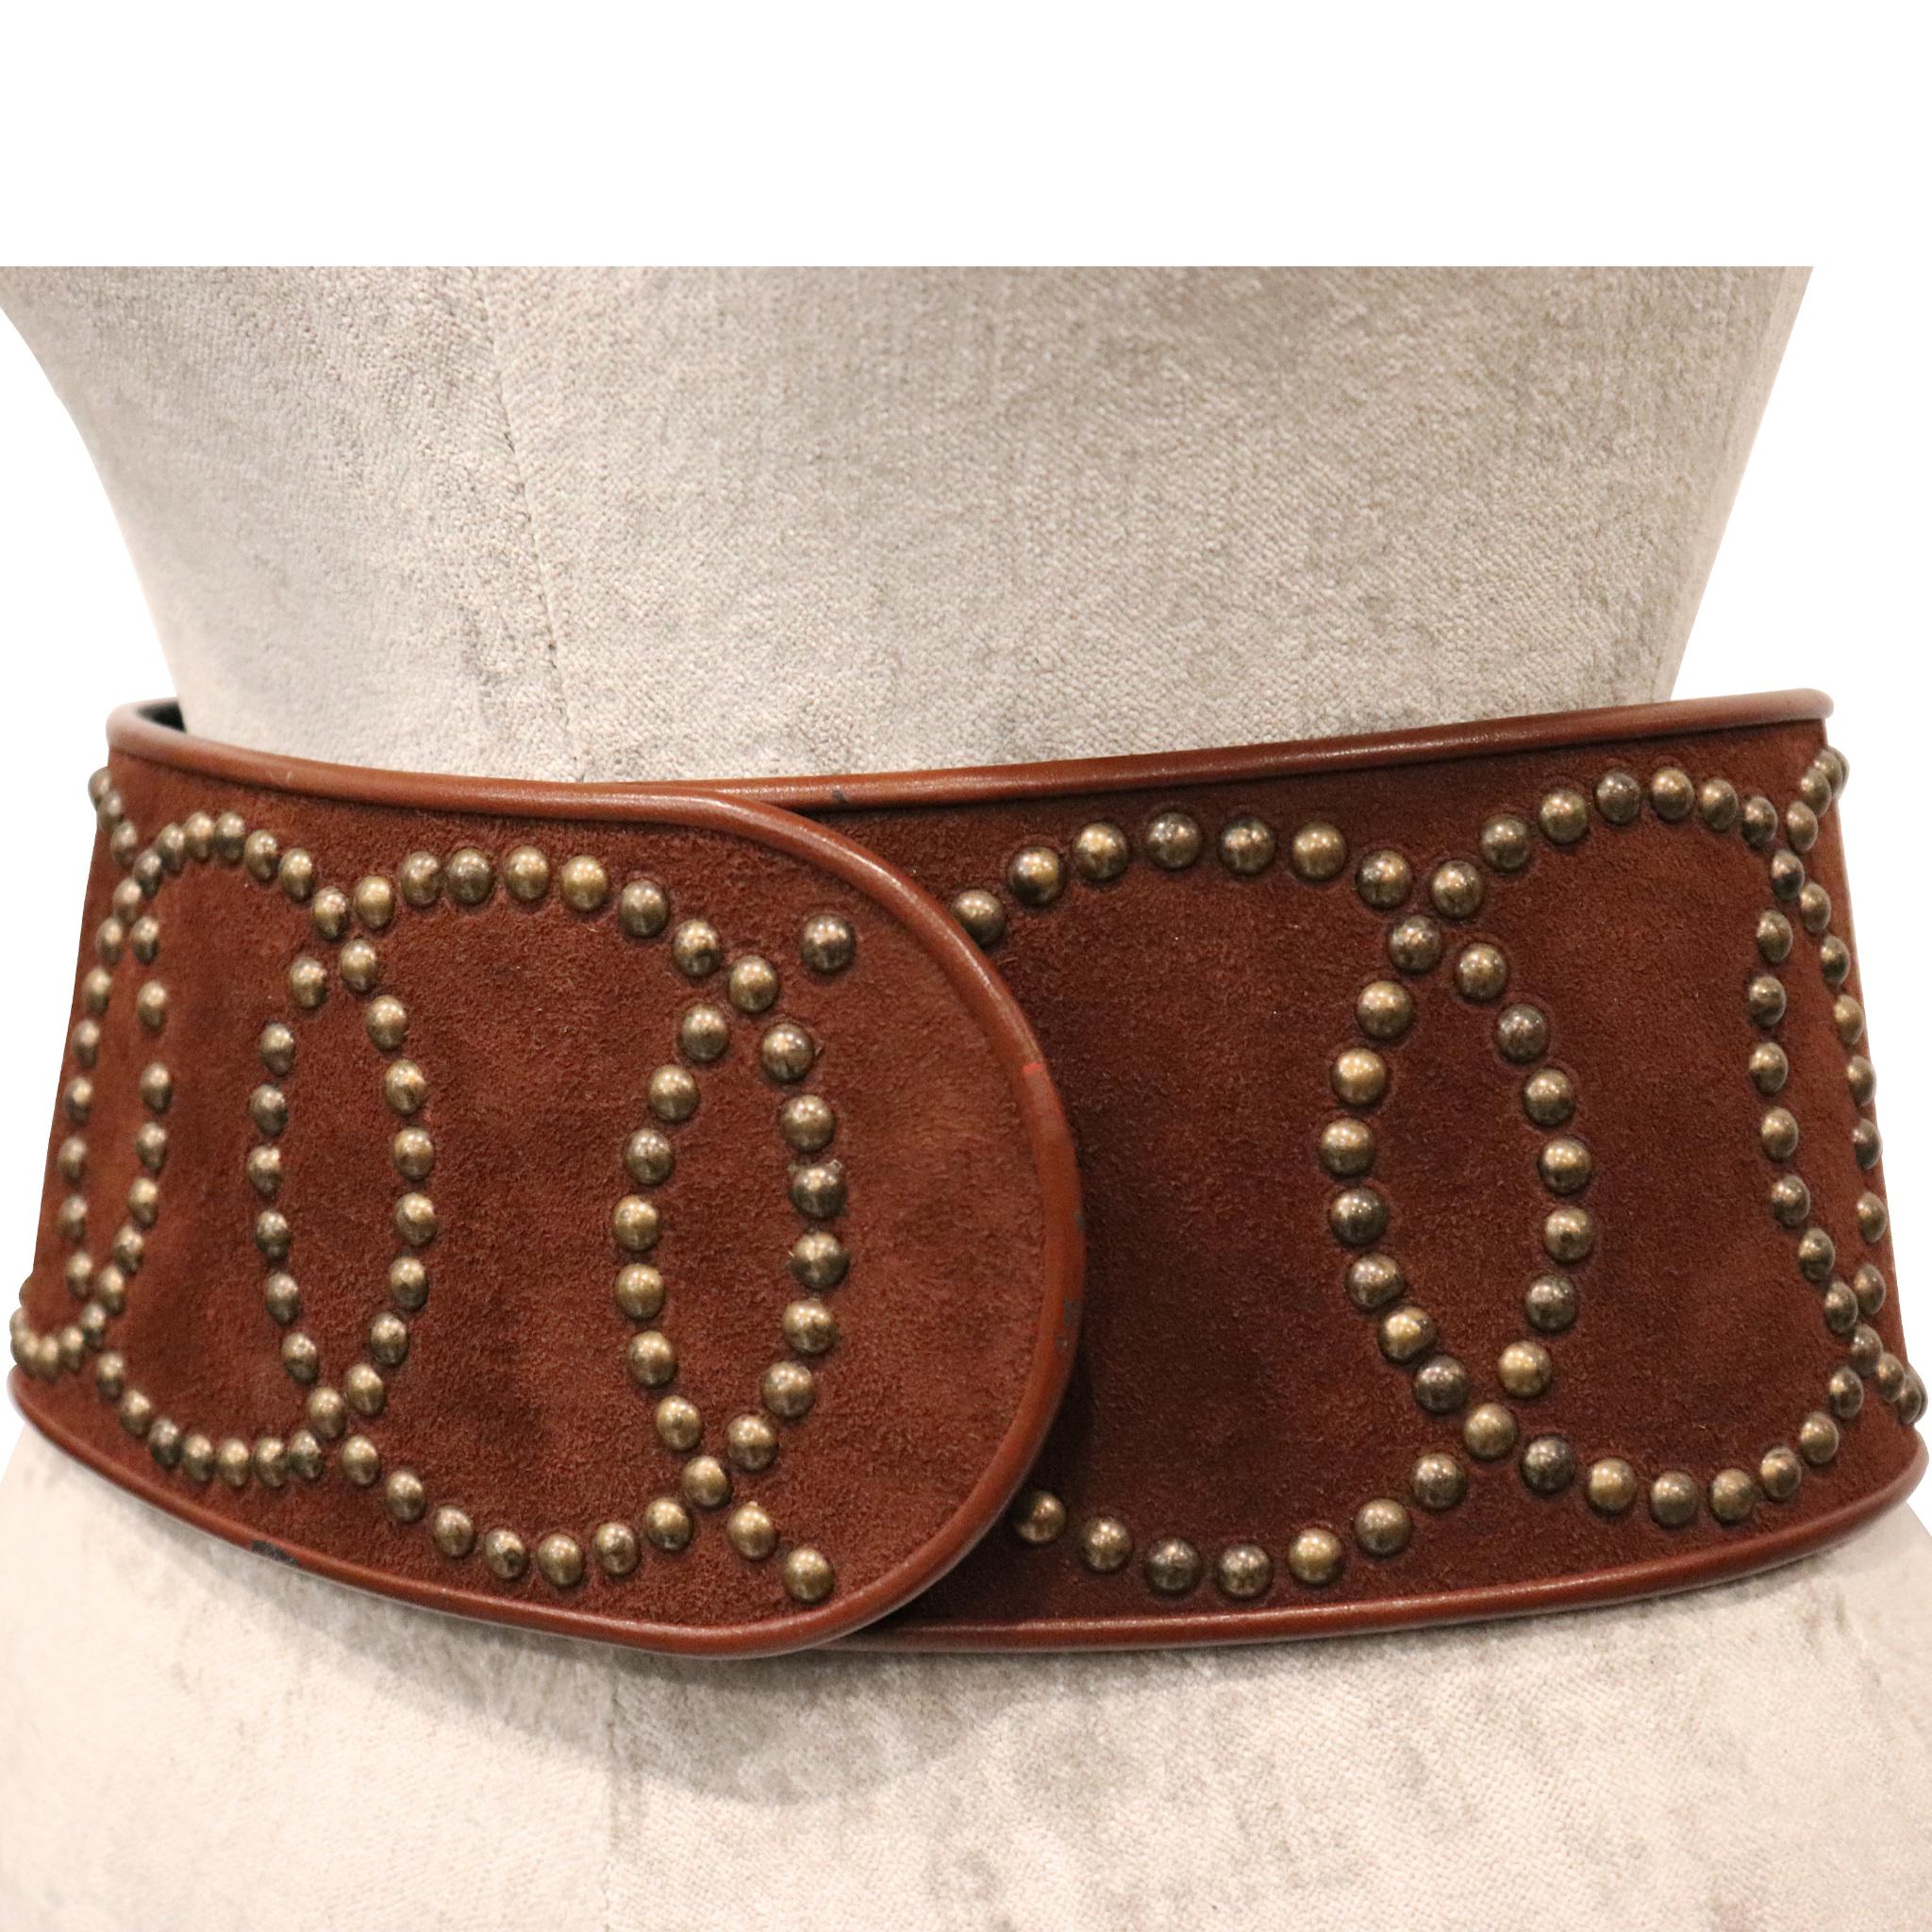 Galanos Large Brown Wide Belt With Bronze Studs. Vintage belt from 1980s in excellent condition 

Measurements:

Longest length - 28.3 inches 
Shortest length - 27 inches 
Height - 4 inches 